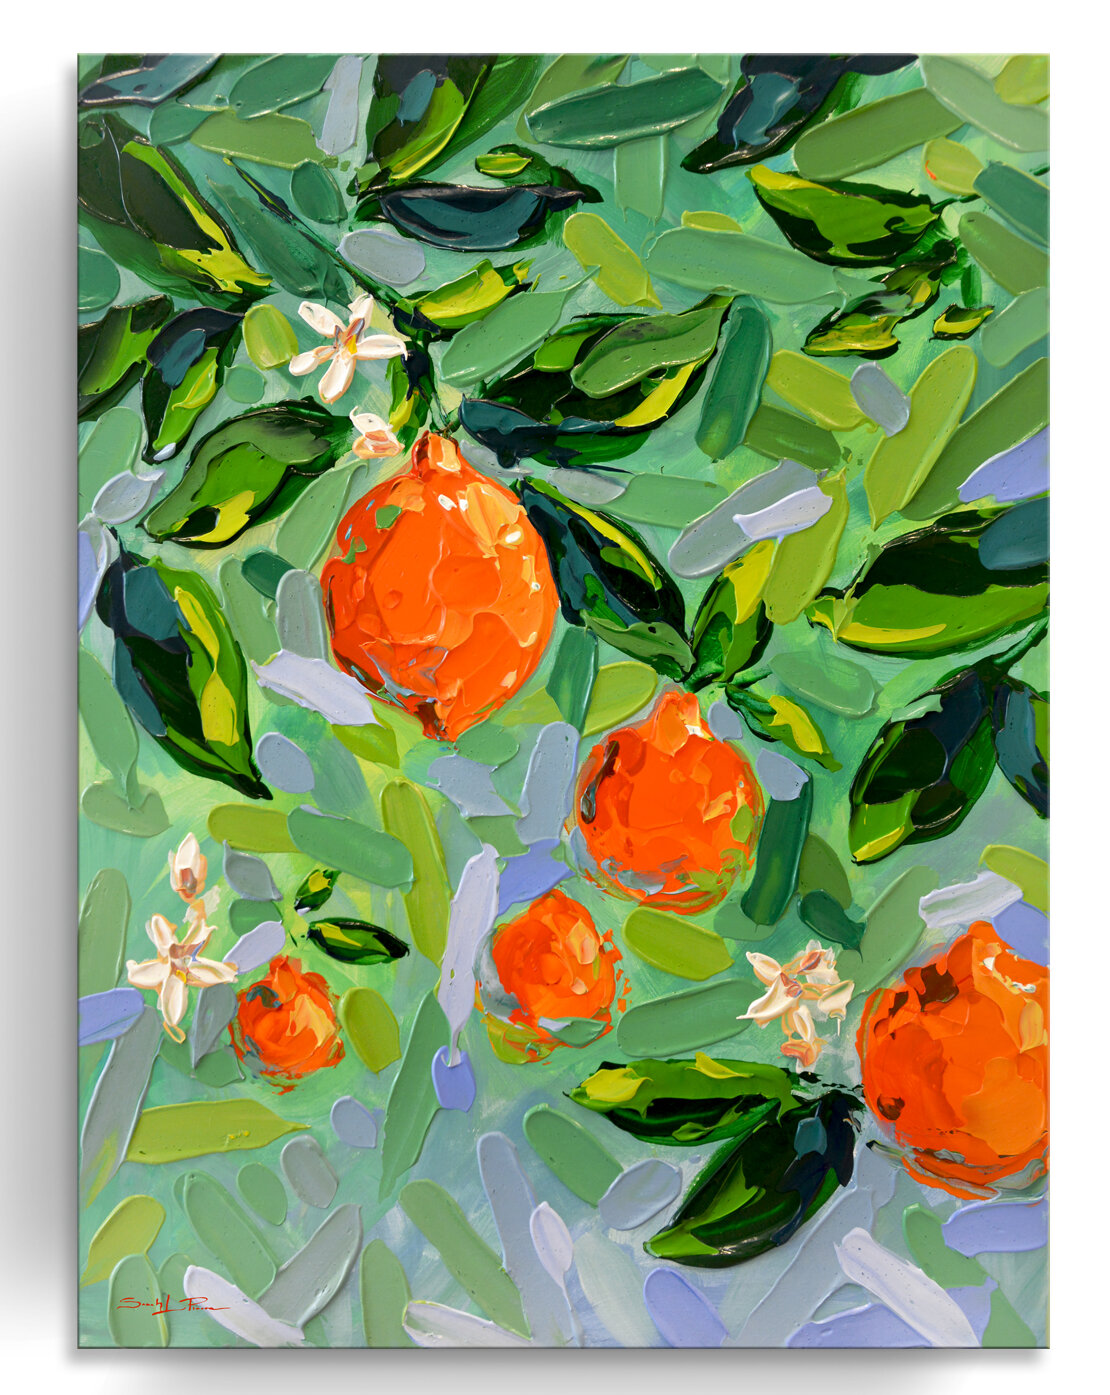 Bay Isle Home Orange Blossom Wrapped Canvas Painting Print On Canvas Reviews Wayfair,Best Places To Travel In Usa